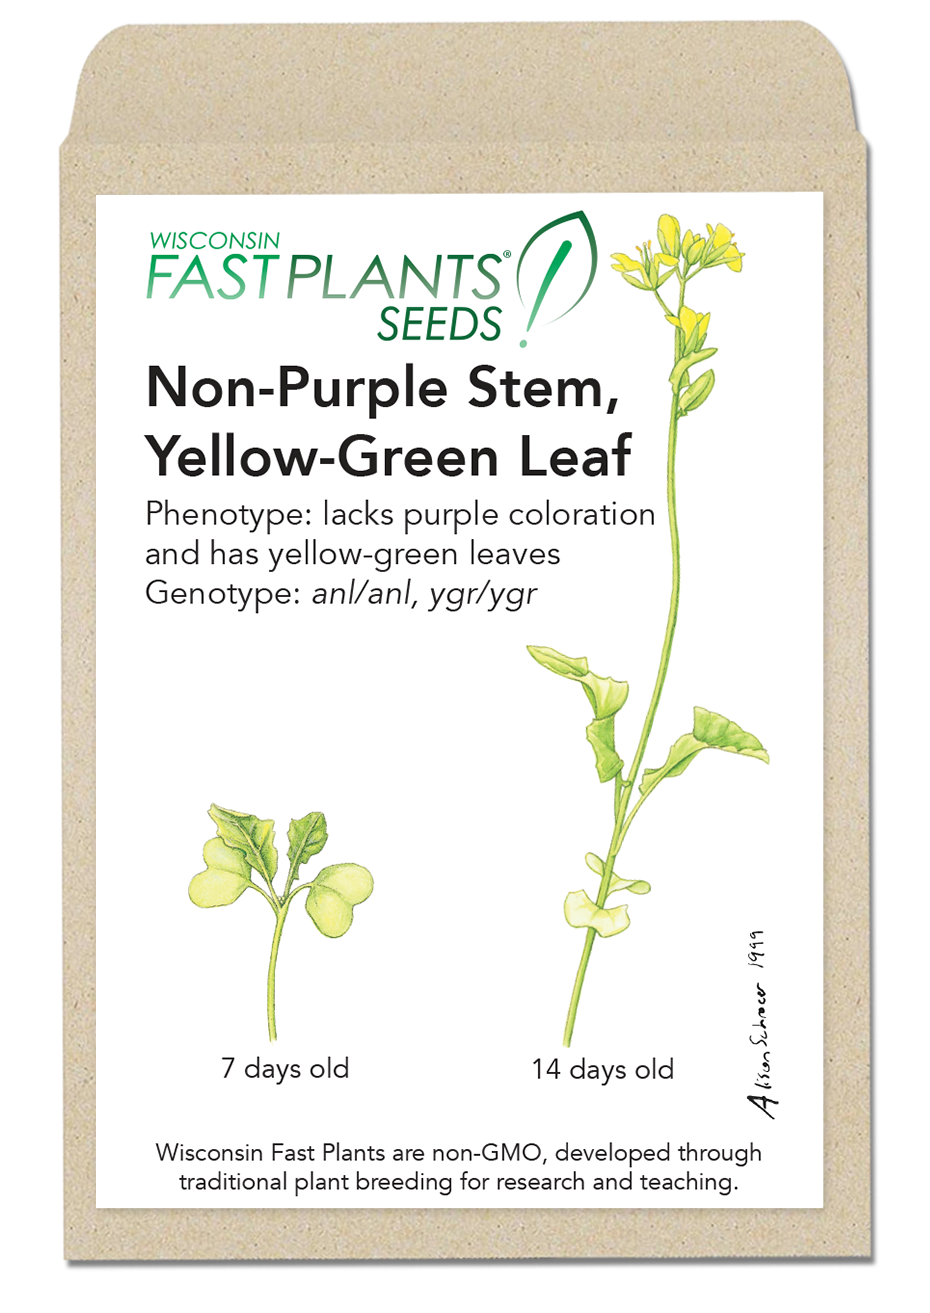 Non-Purple Stem, Yellow-Green Leaf Fast Plants seed packet